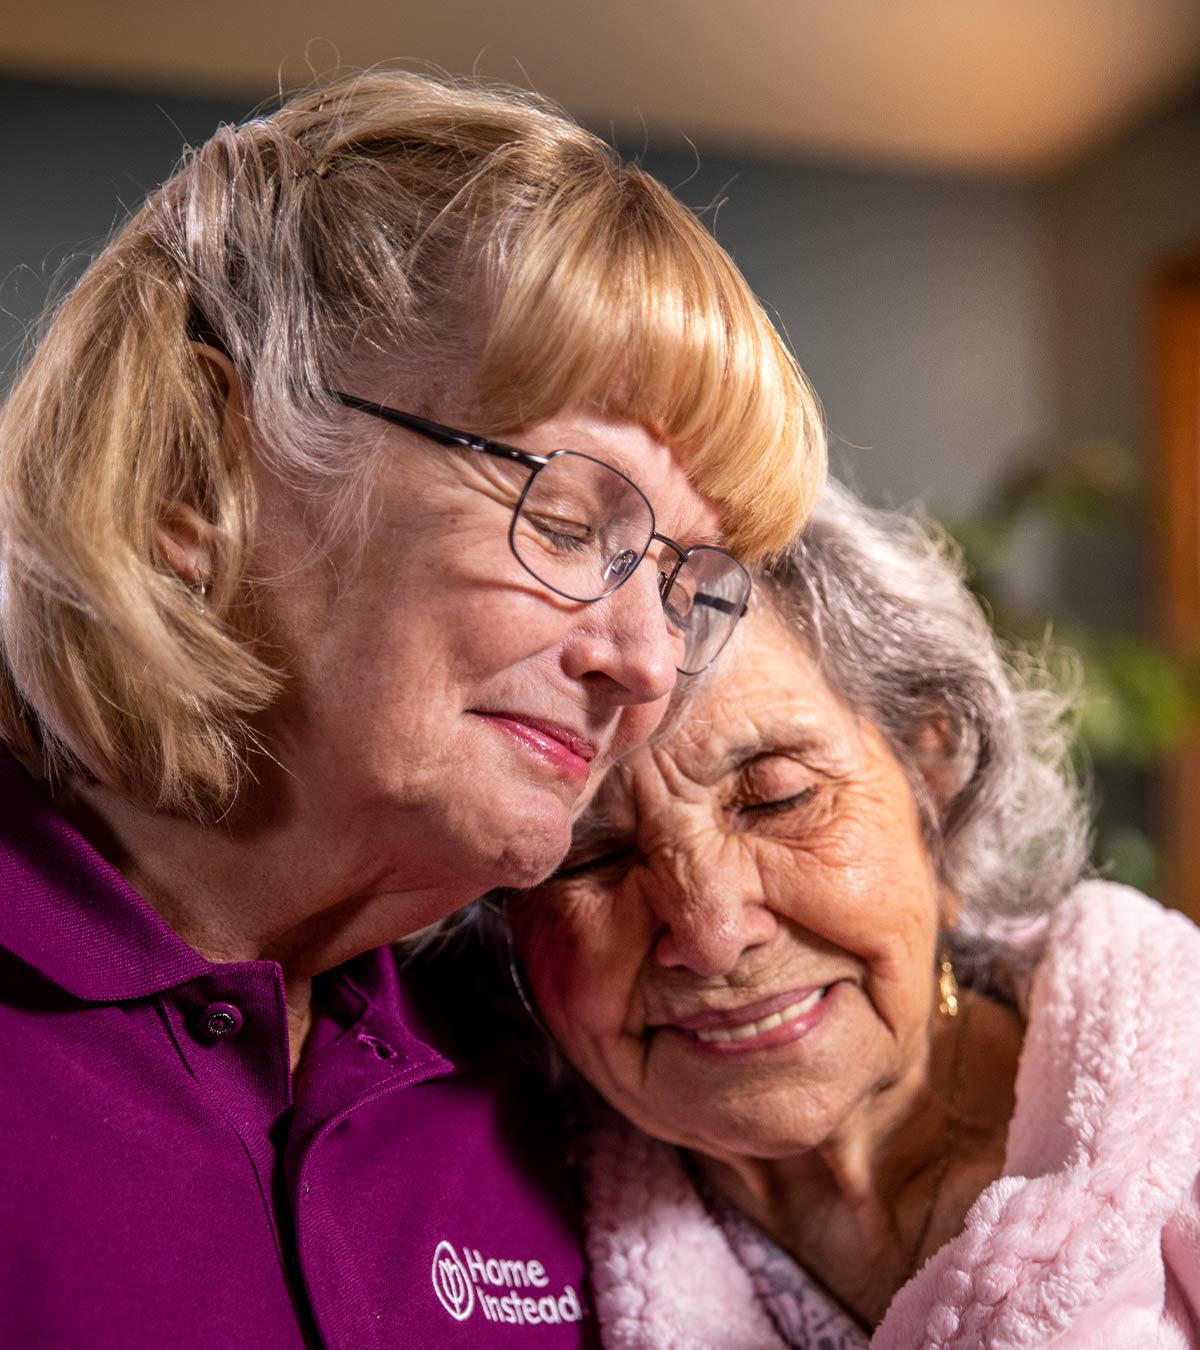 CAREGiver providing in-home senior care services. Home Instead of Franklin, TN provides Elder Care to aging adults. 